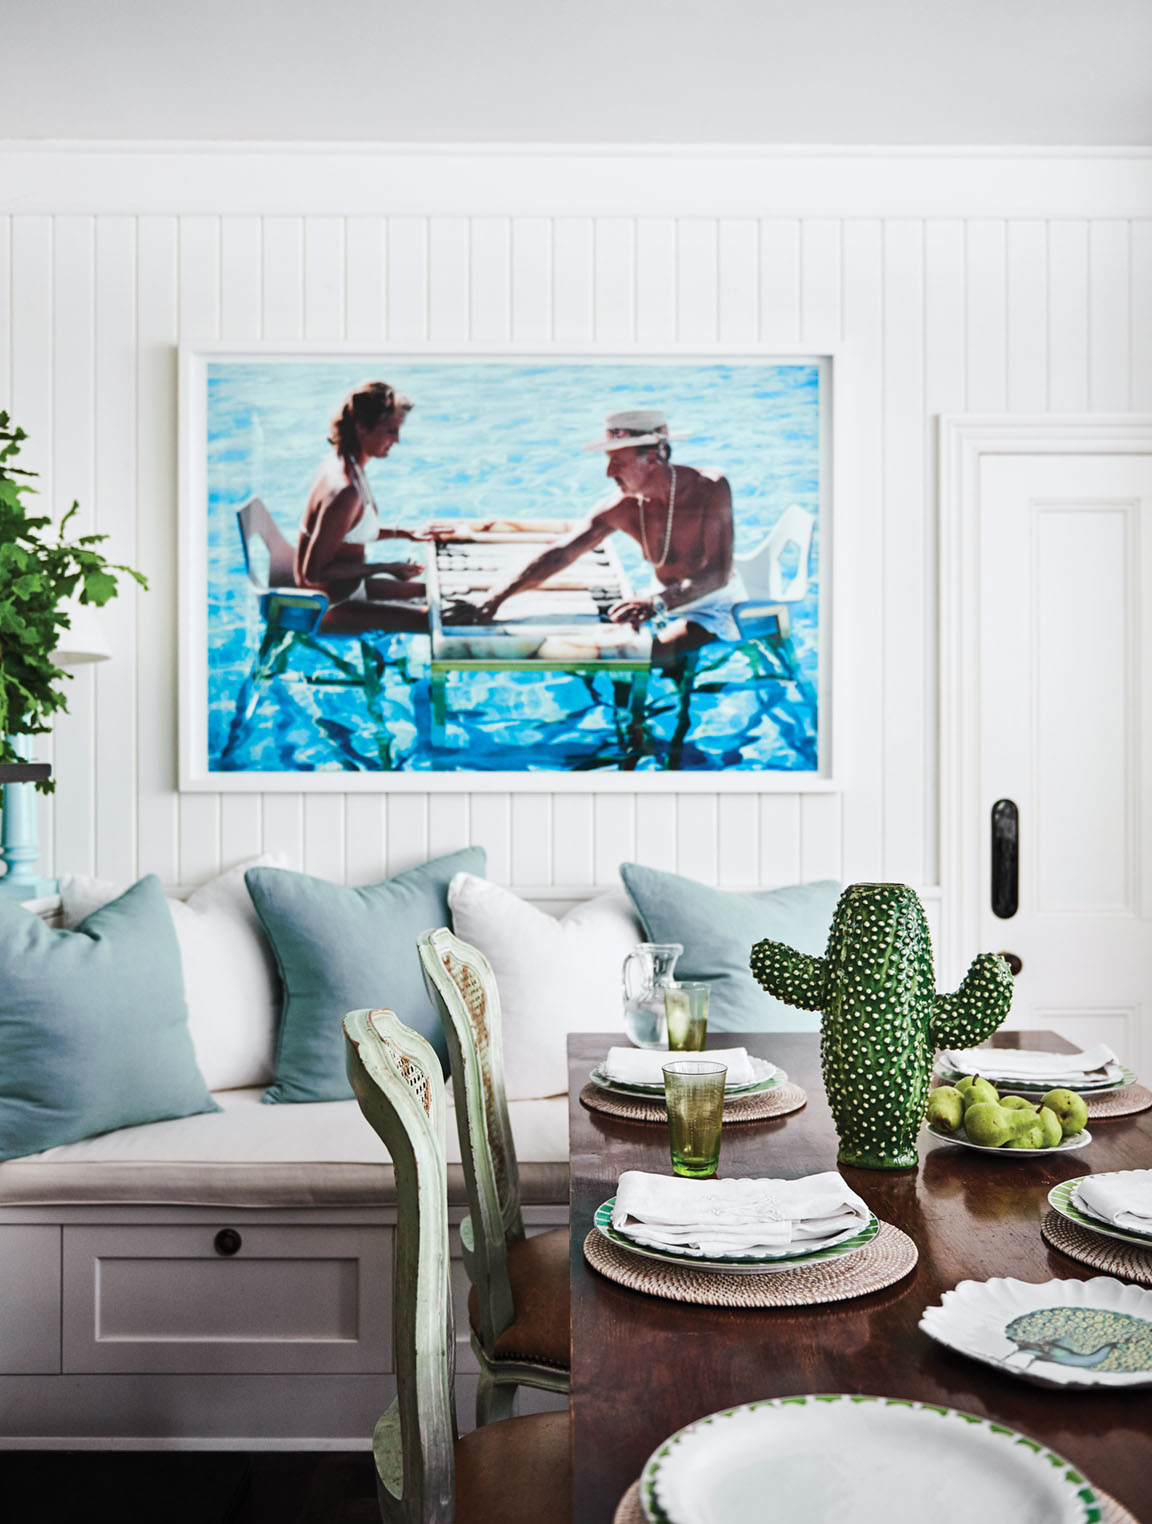 Above a banquette, the Slim Aarons' photograph features couple playing a board game in a pool